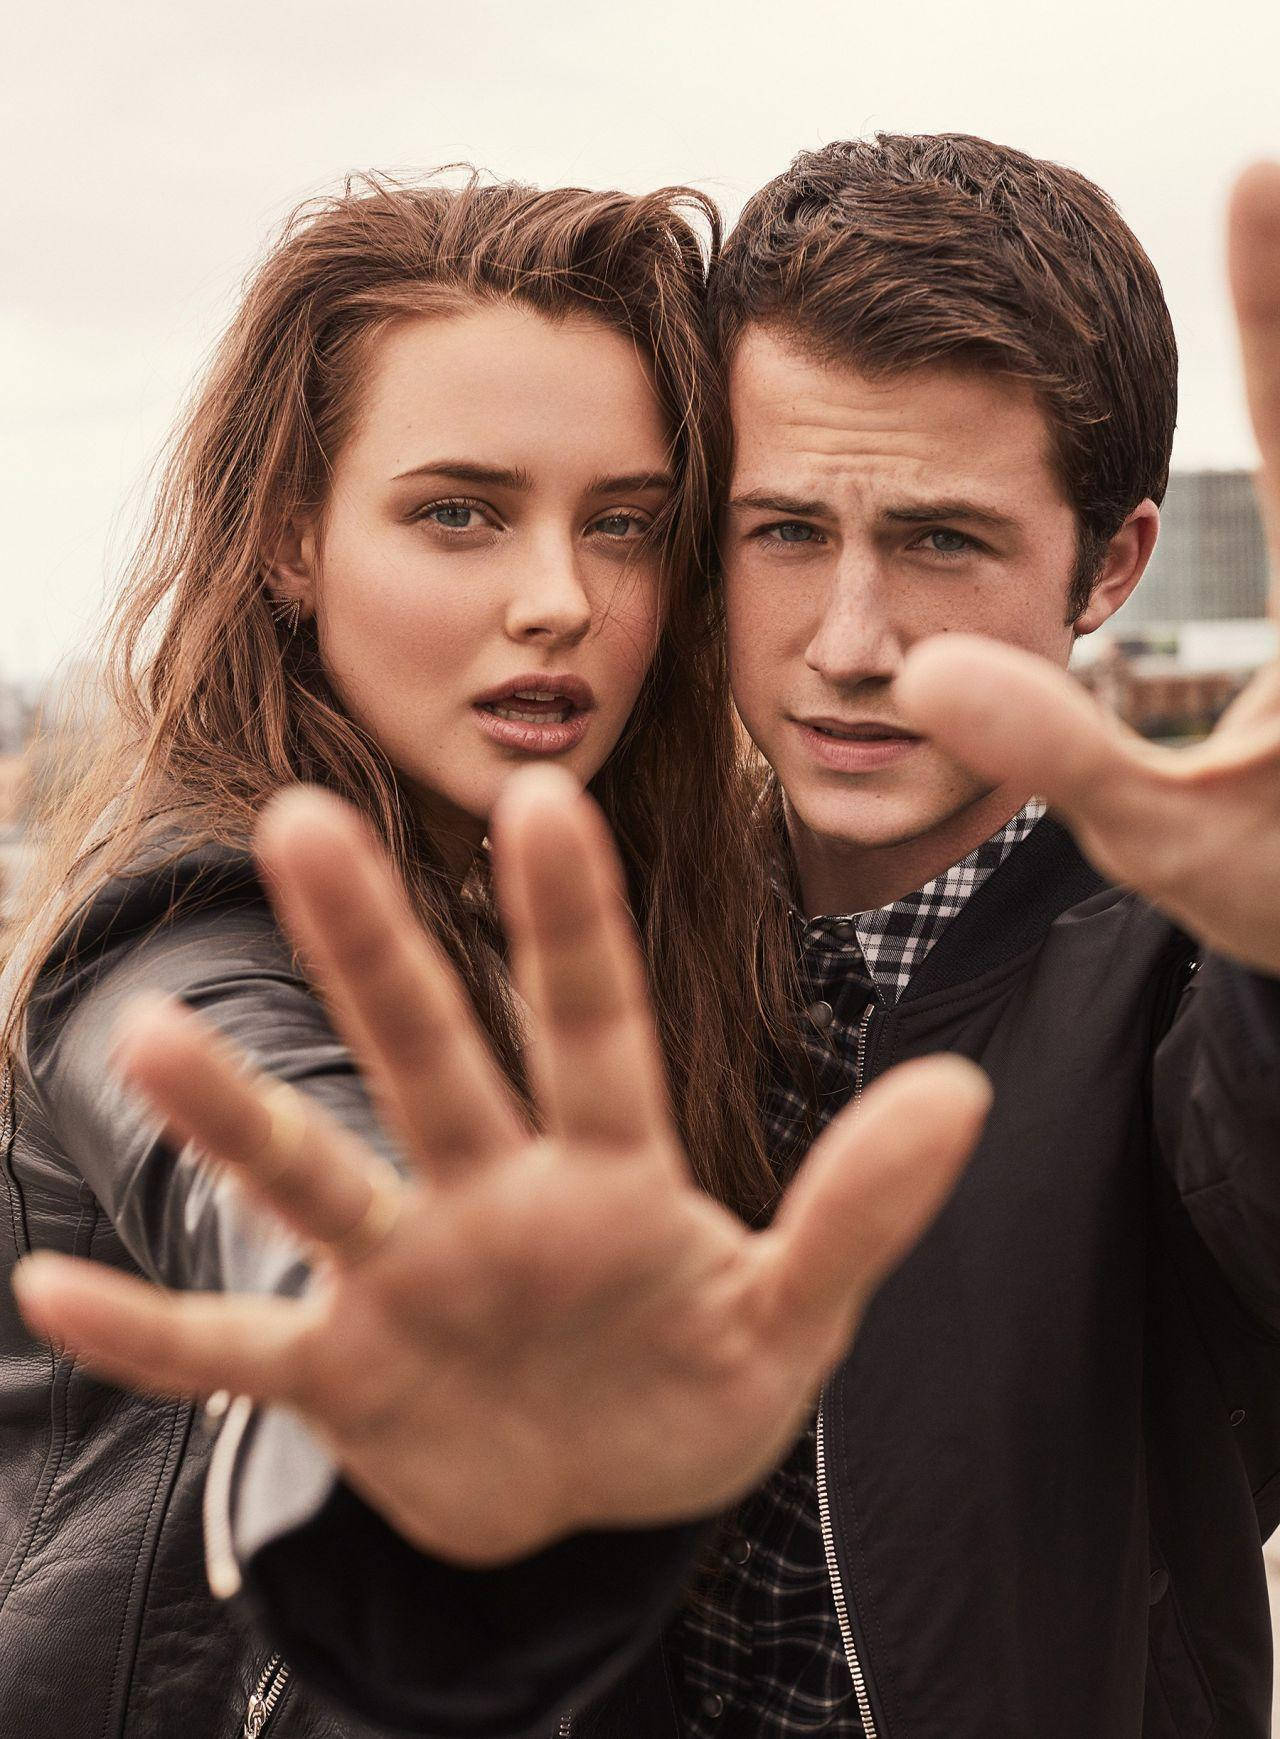 Katherine Langford And Dylan Minnette Background